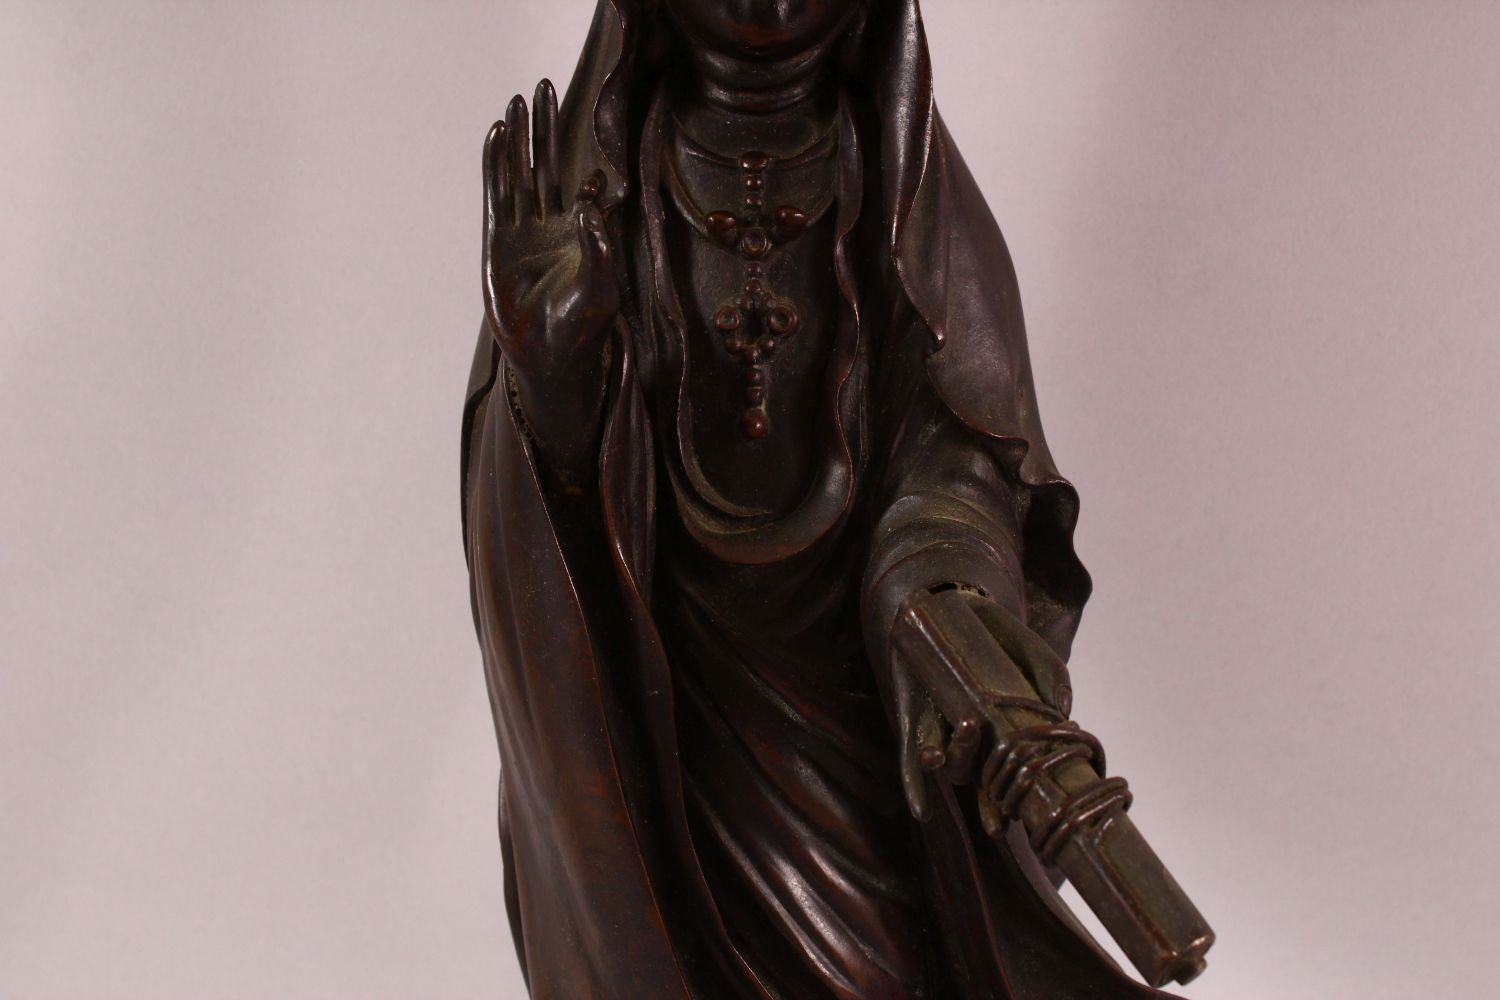 A CHINESE BRONZE FIGURE OF GUANYIN holding a scroll, her other hand raised in a mindfulness gesture, - Image 6 of 8